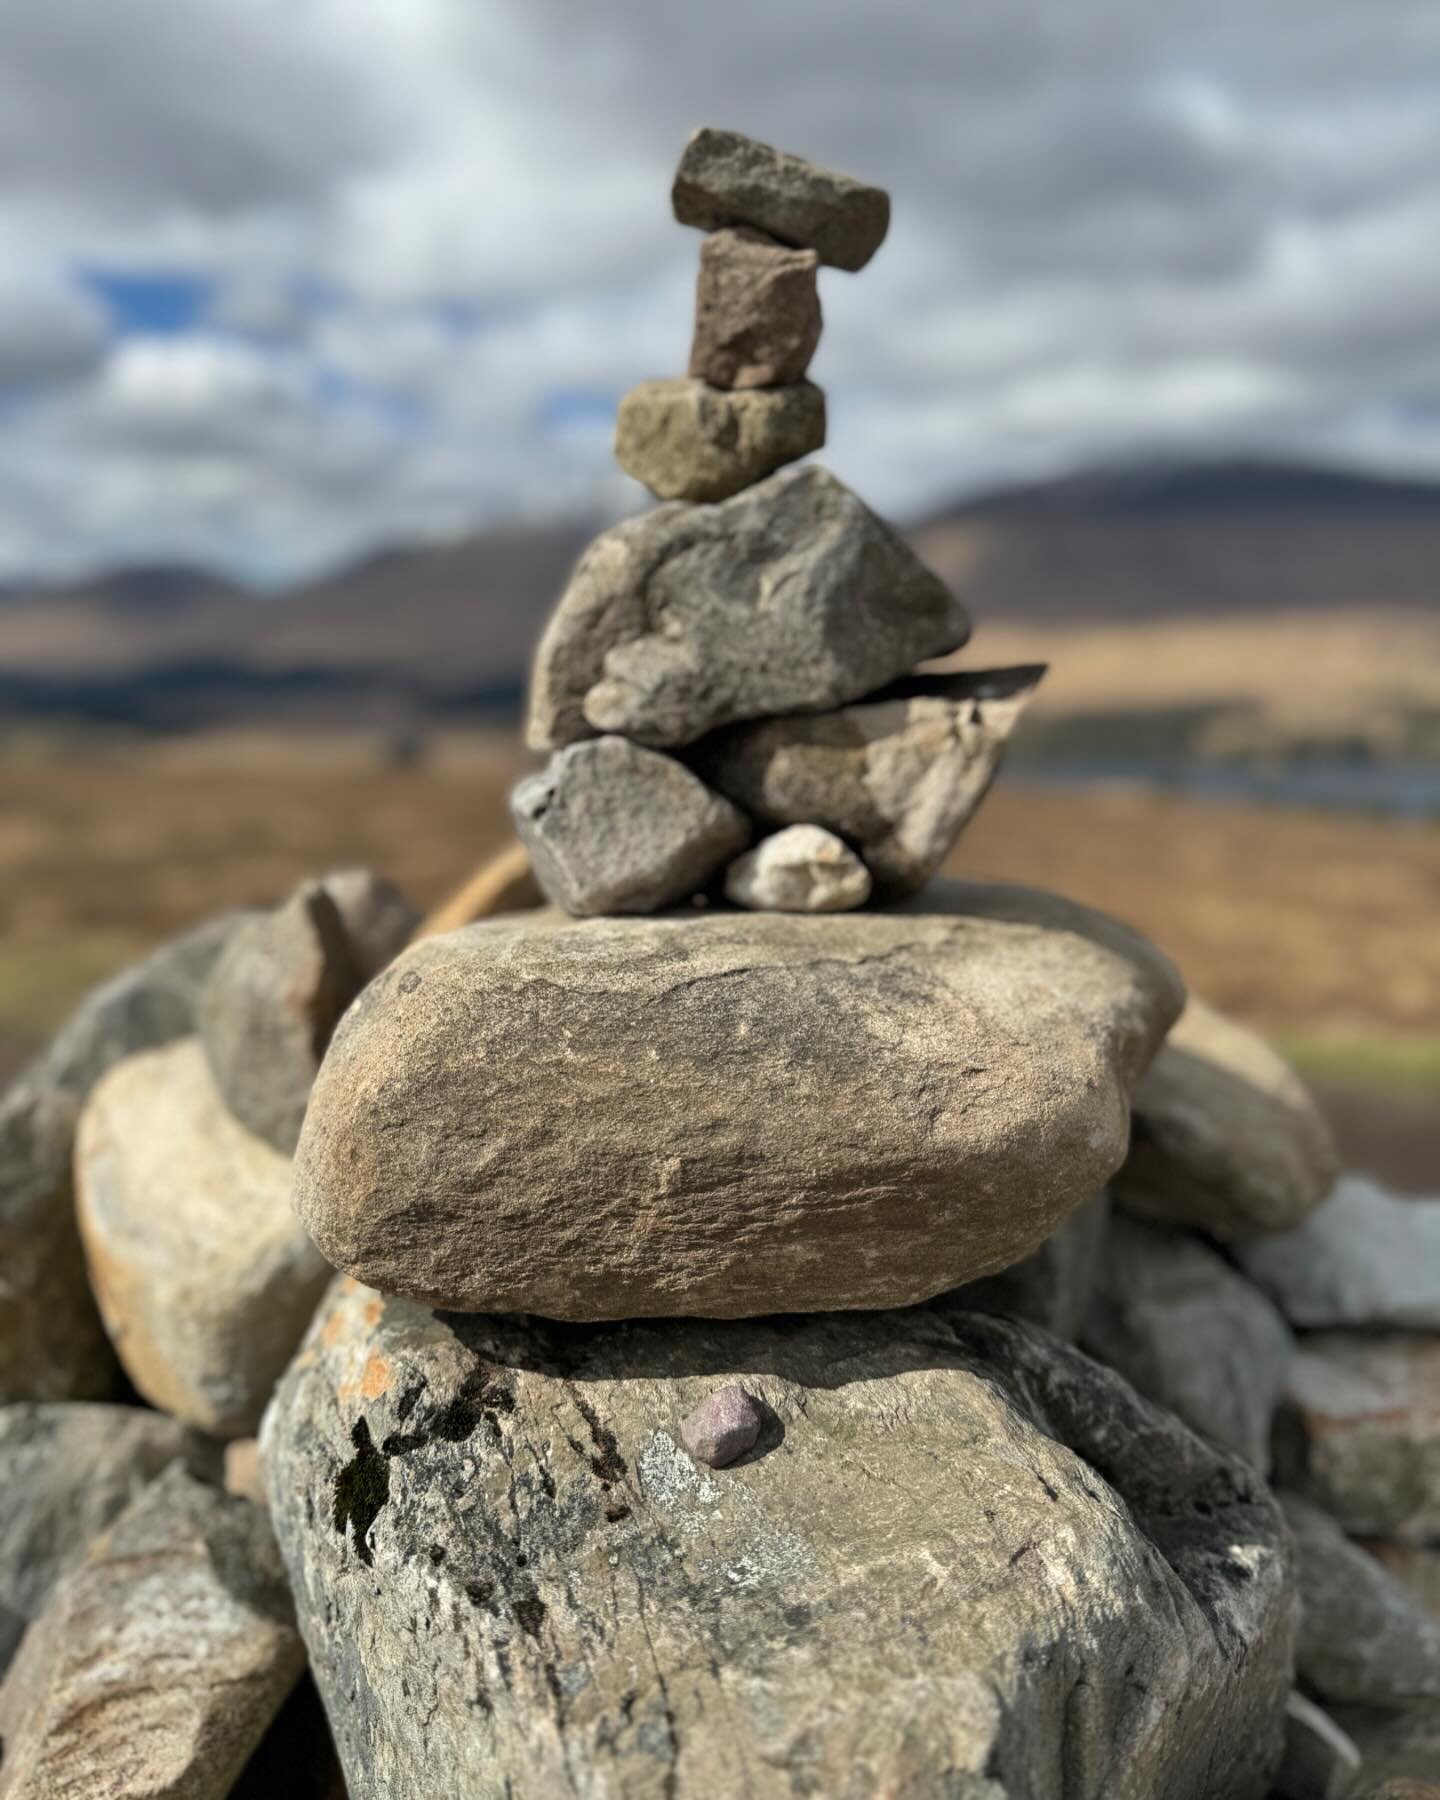 Climbing Beinn Inverveigh to discover a cairn at the summit - surrounded by the most gorgeous views! 

Coincidentally, we each had a small stone in our pocket - which we placed, careful to not dislodge any other stones - and a wish was made. 

My wis